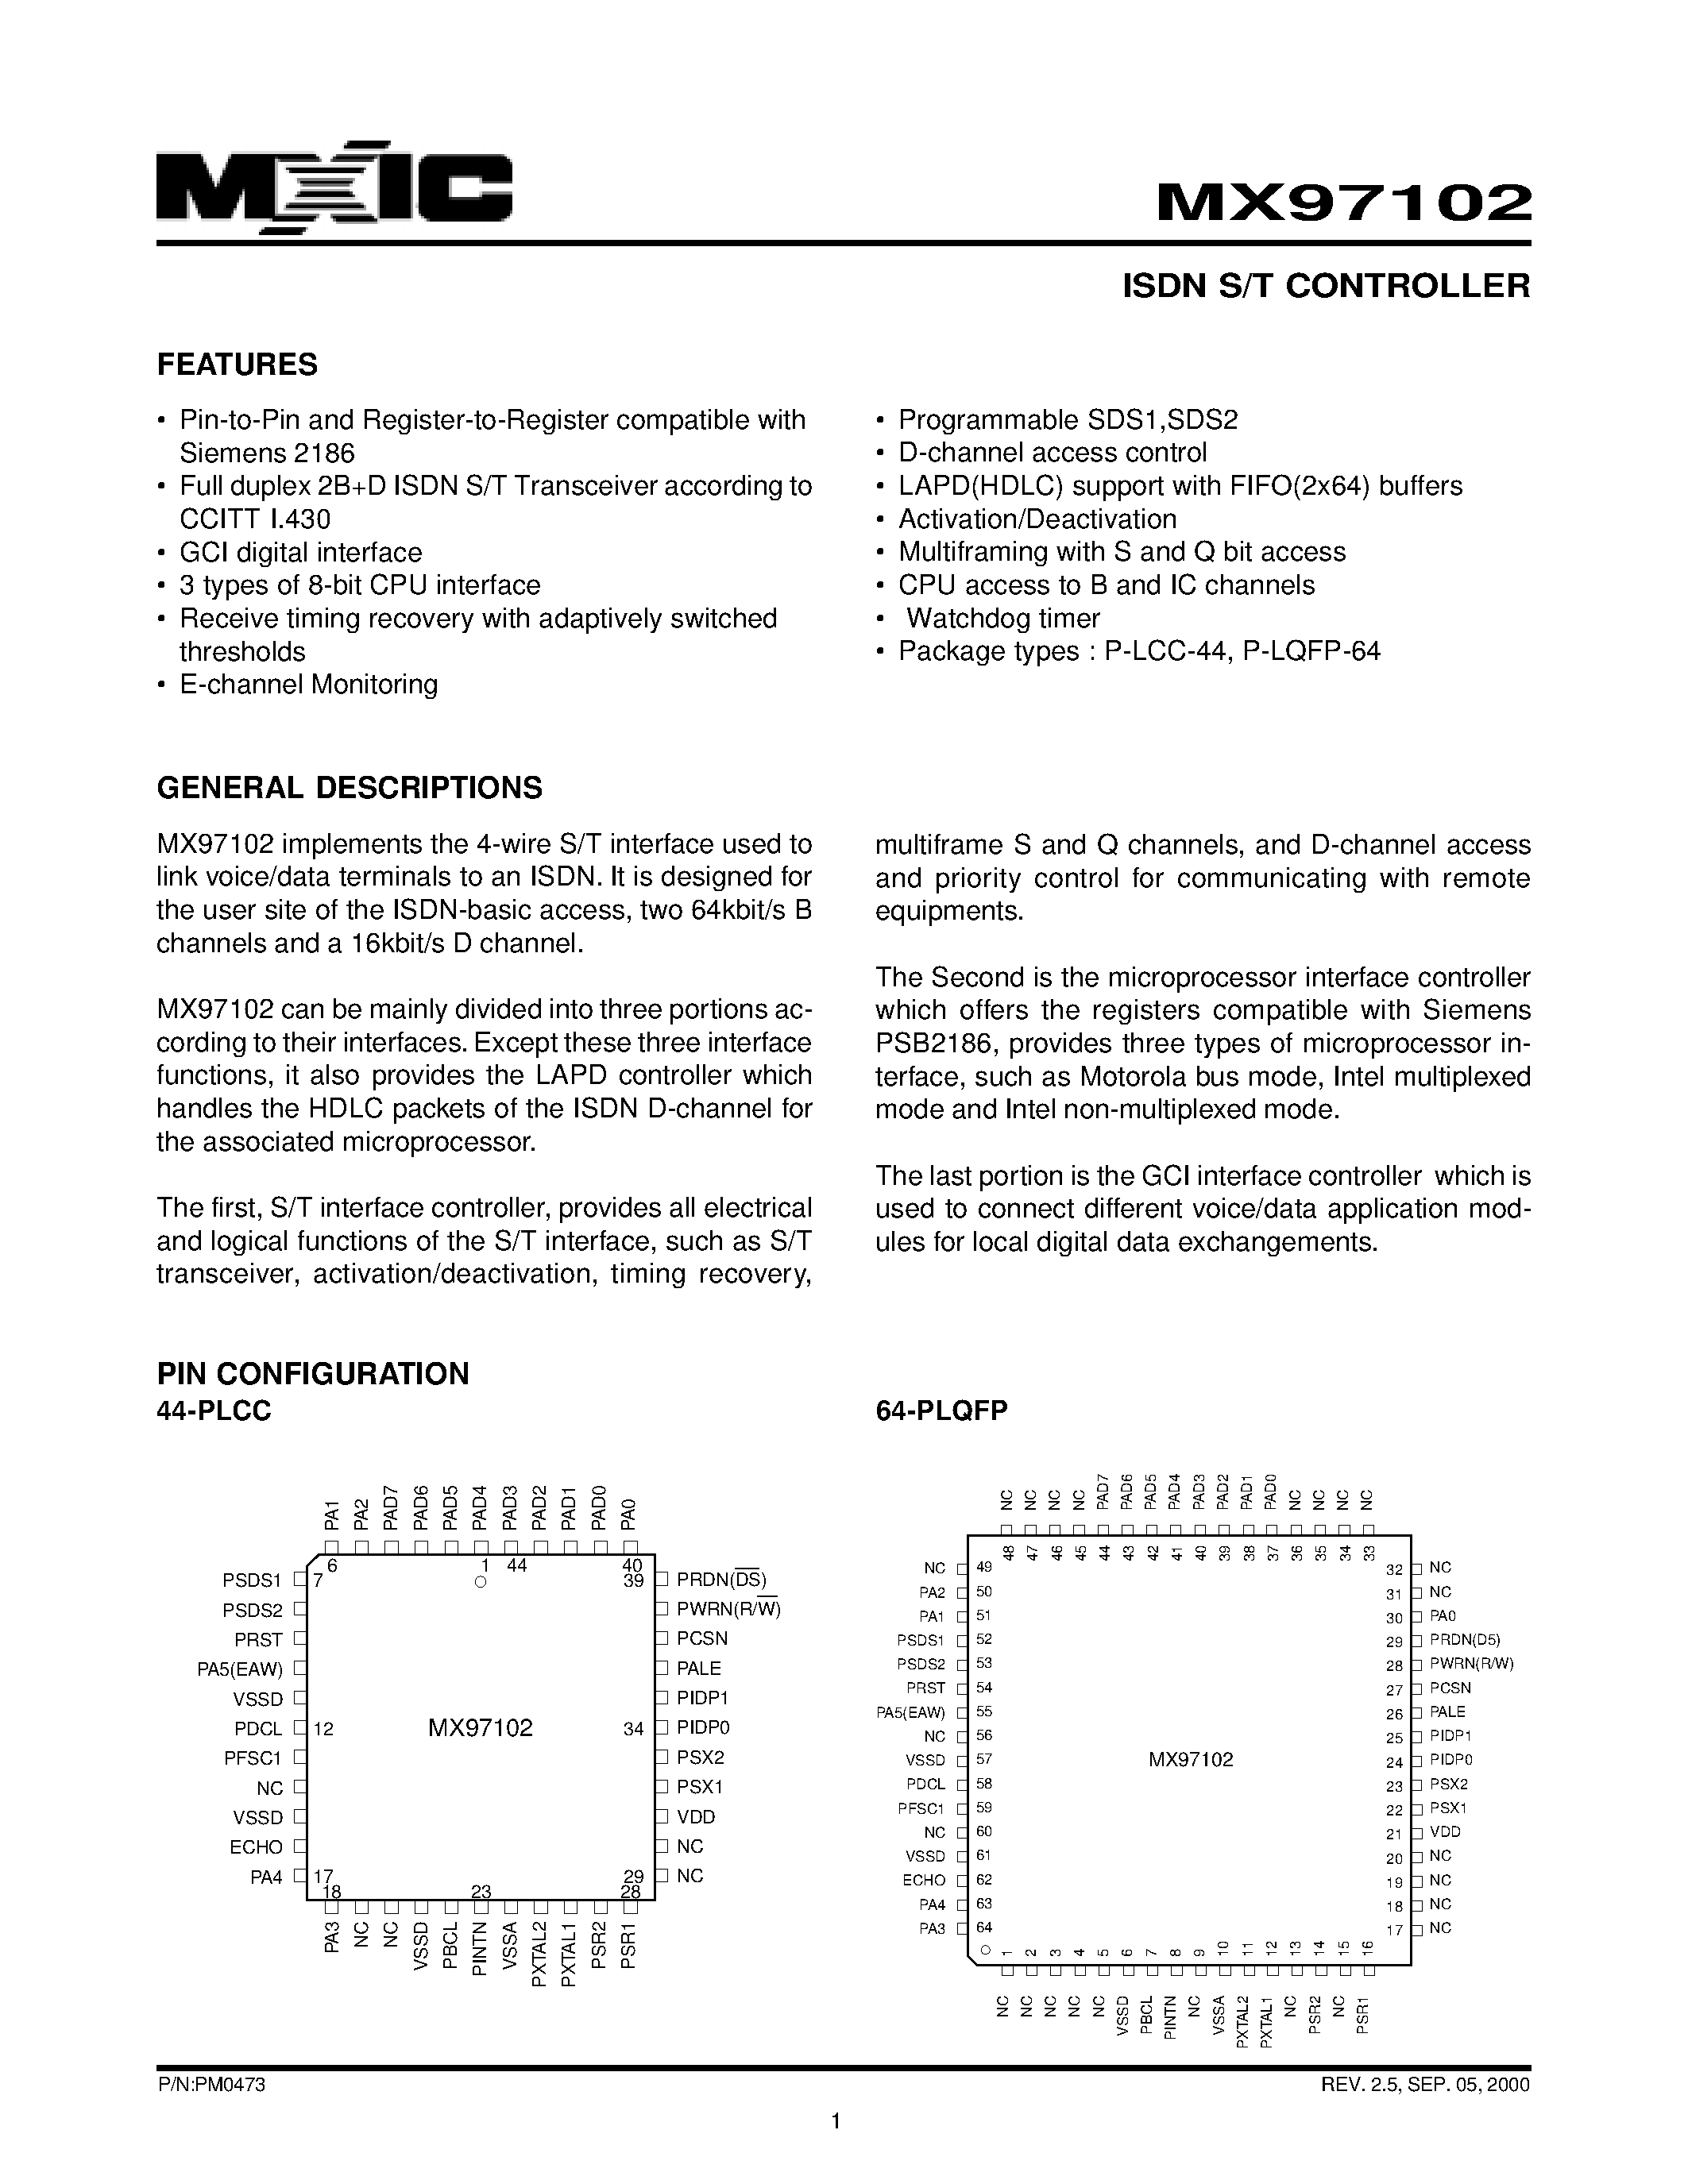 Datasheet MX97102 - ISDN S/T CONTROLLER page 1